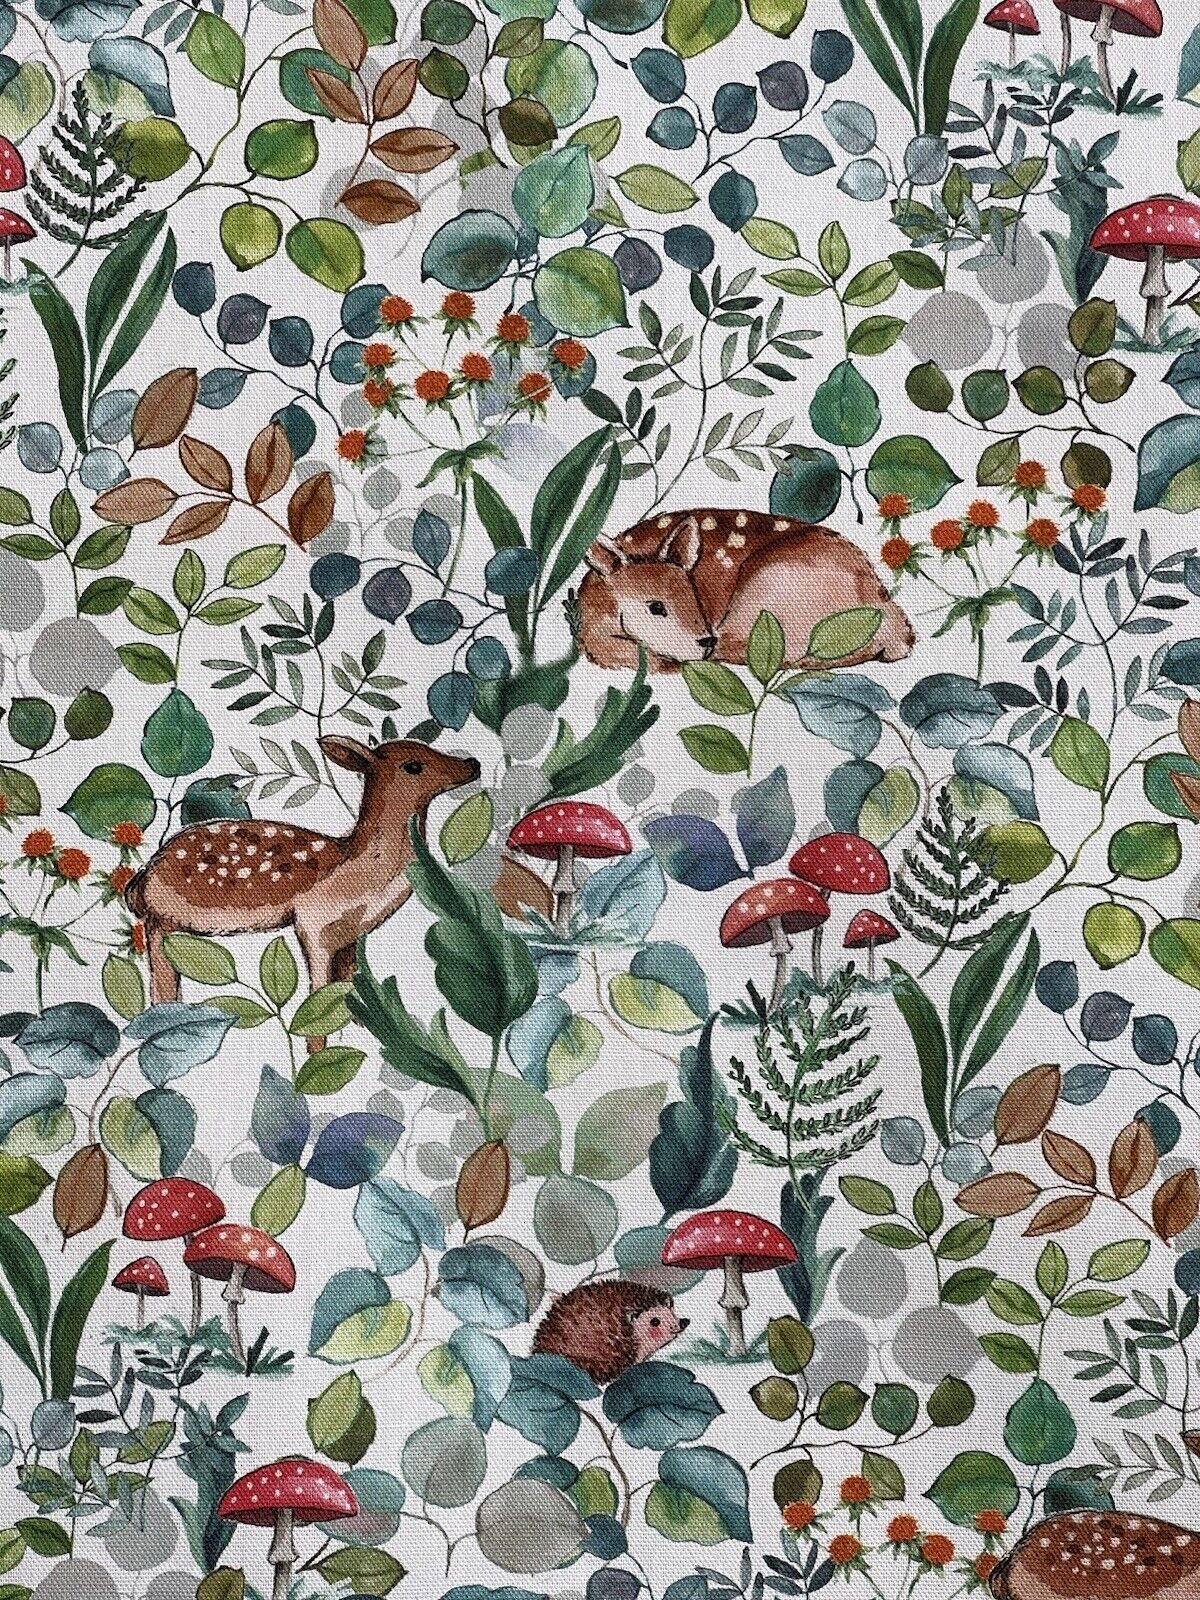 Enchanting Forest Friends: Bambi and Deer Cotton Fabric - Perfect for Botanical Design in Kids' Bedroom Sewing Projects